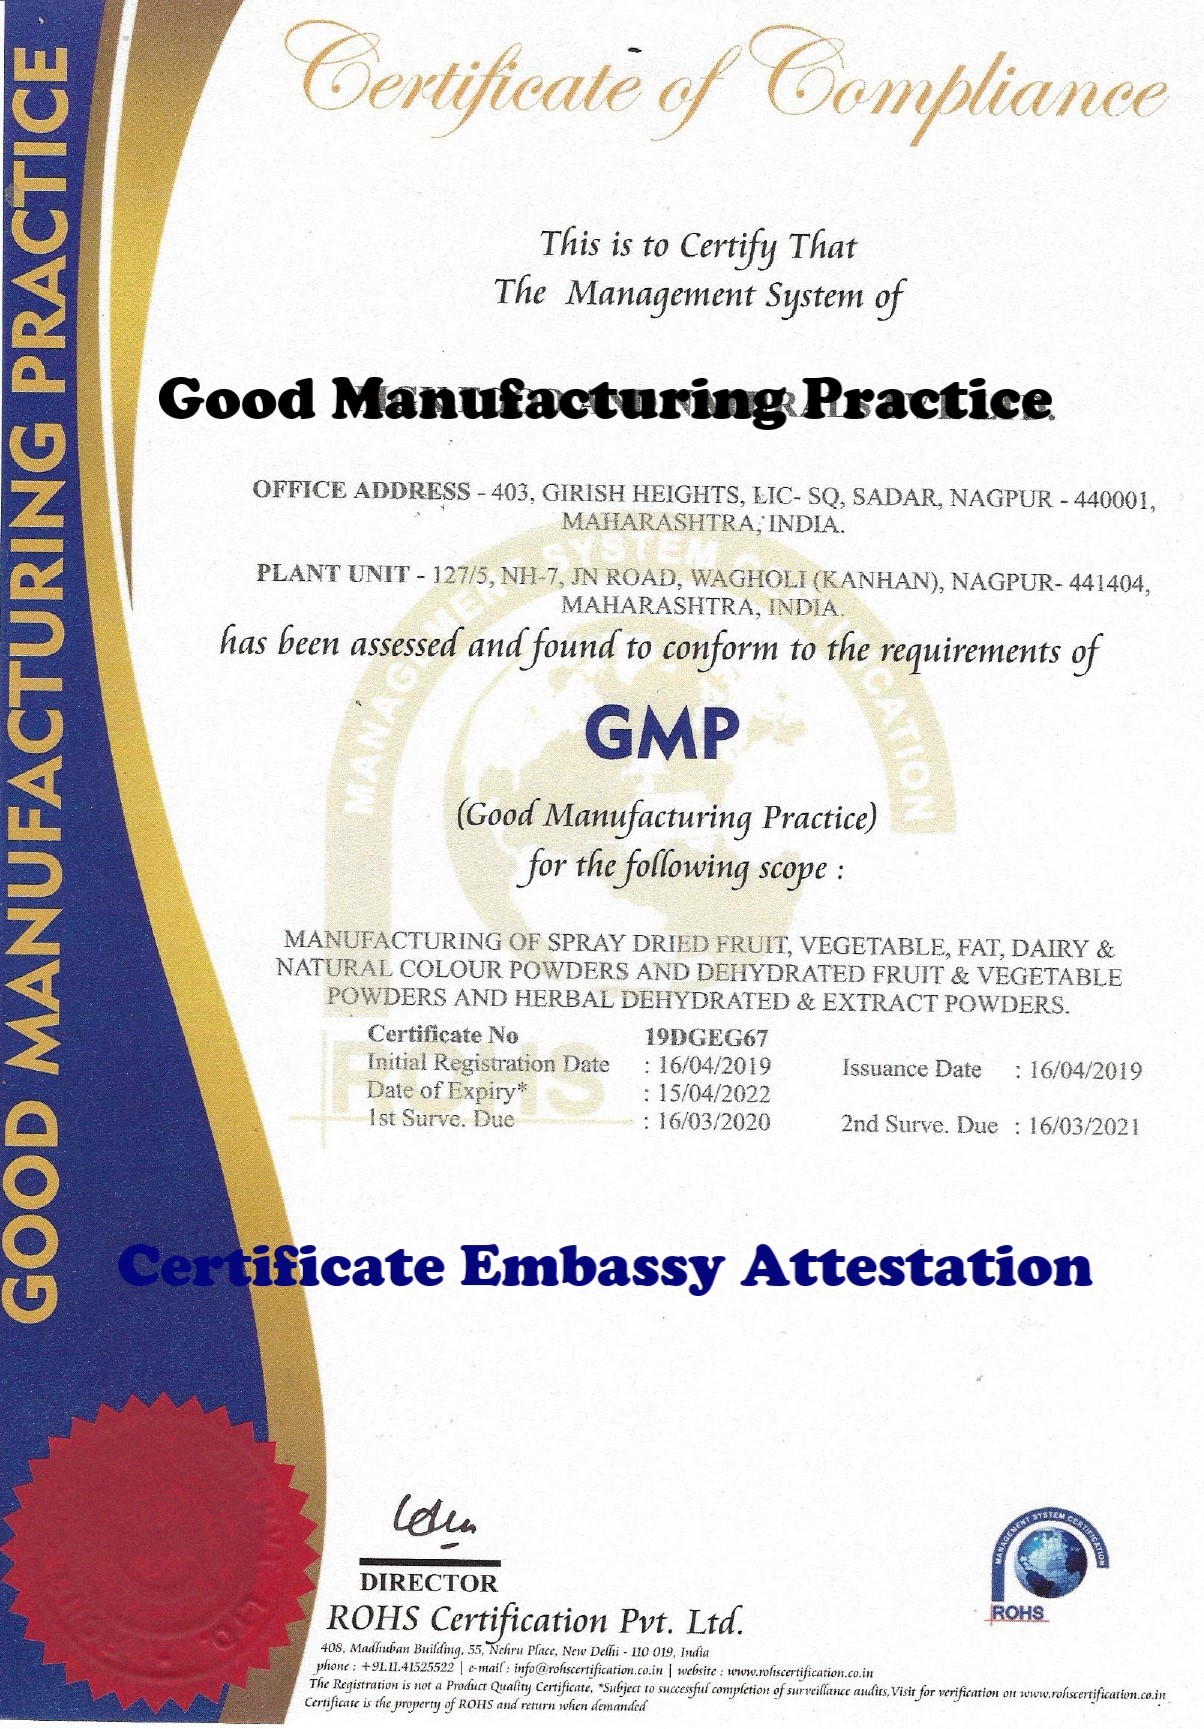 GMP Certificate Attestation from United Kingdom Embassy